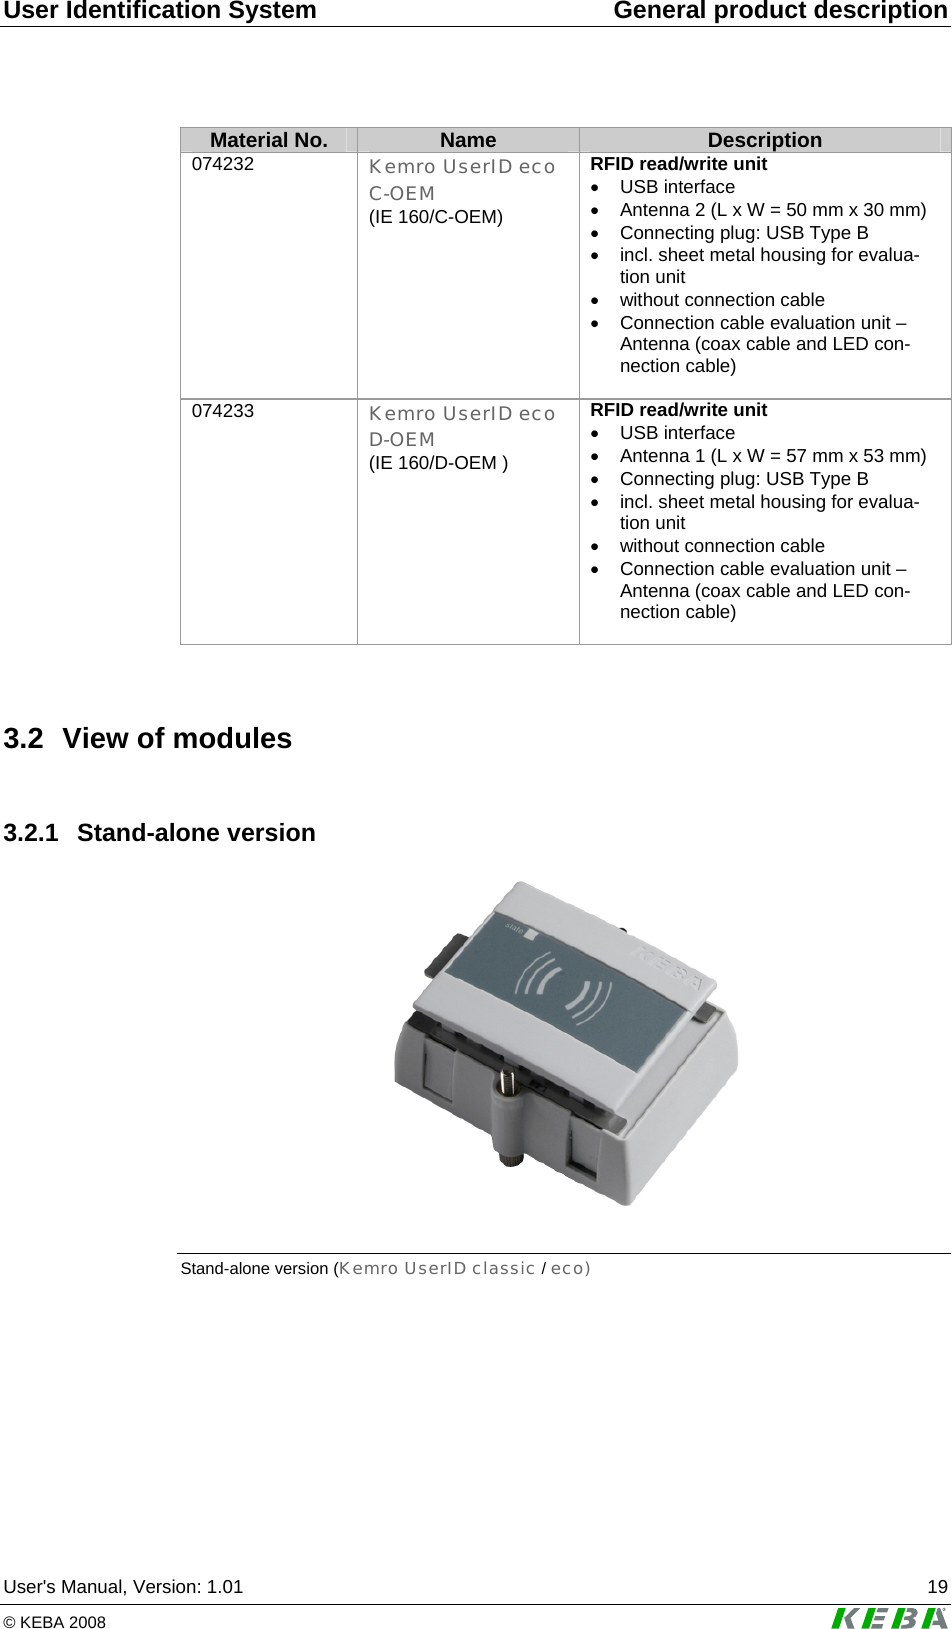 User Identification System  General product description User&apos;s Manual, Version: 1.01  19 © KEBA 2008   Material No.  Name  Description 074232   Kemro UserID eco C-OEM  (IE 160/C-OEM) RFID read/write unit • USB interface •  Antenna 2 (L x W = 50 mm x 30 mm) •  Connecting plug: USB Type B •  incl. sheet metal housing for evalua-tion unit •  without connection cable  •  Connection cable evaluation unit – Antenna (coax cable and LED con-nection cable)  074233   Kemro UserID eco D-OEM  (IE 160/D-OEM ) RFID read/write unit • USB interface •  Antenna 1 (L x W = 57 mm x 53 mm) •  Connecting plug: USB Type B •  incl. sheet metal housing for evalua-tion unit •  without connection cable  •  Connection cable evaluation unit – Antenna (coax cable and LED con-nection cable)   3.2 View of modules 3.2.1 Stand-alone version  Stand-alone version (Kemro UserID classic / eco)  